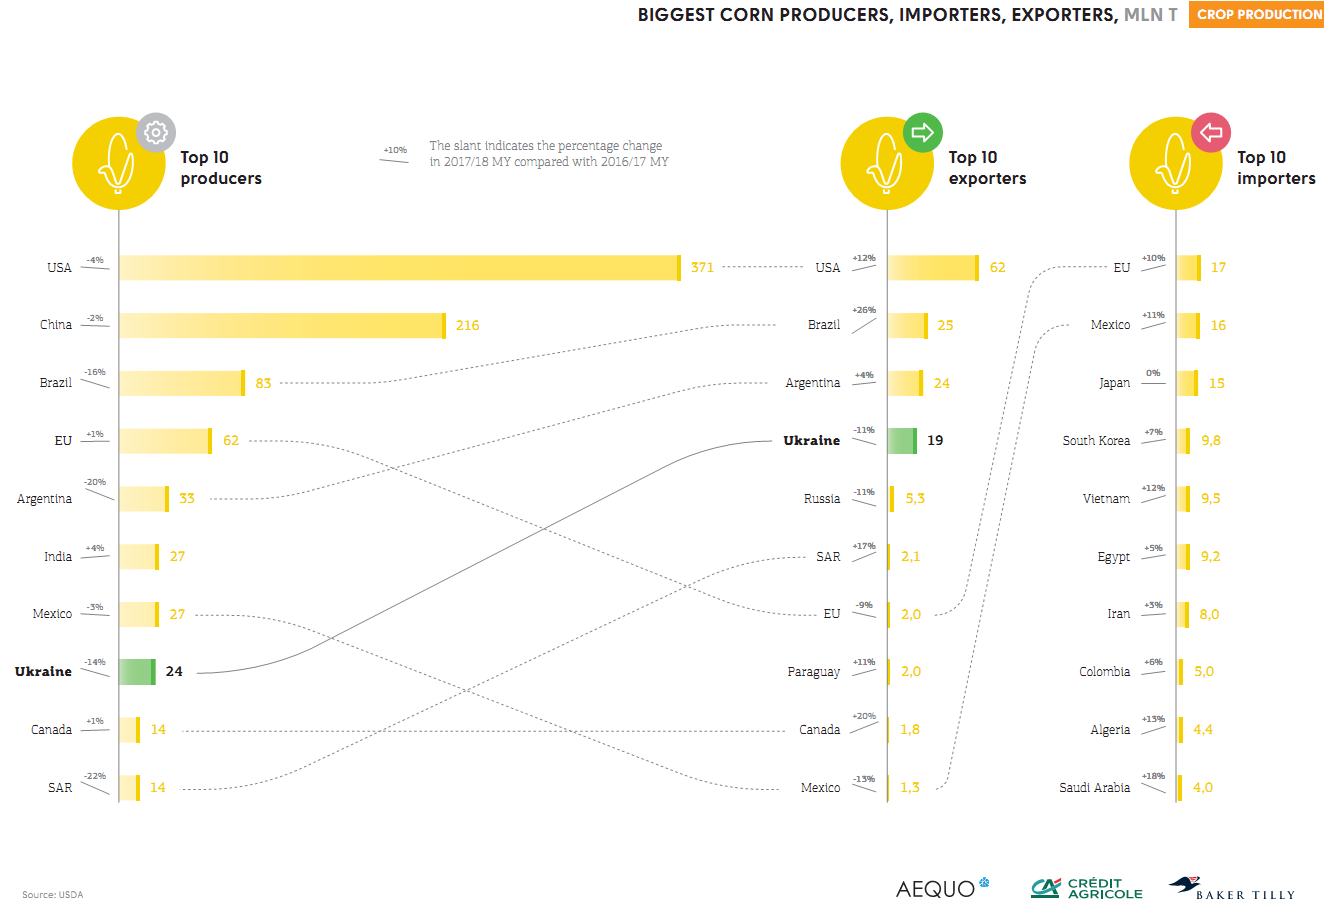 Major corn producers, exporters and importers (click for full resolution)